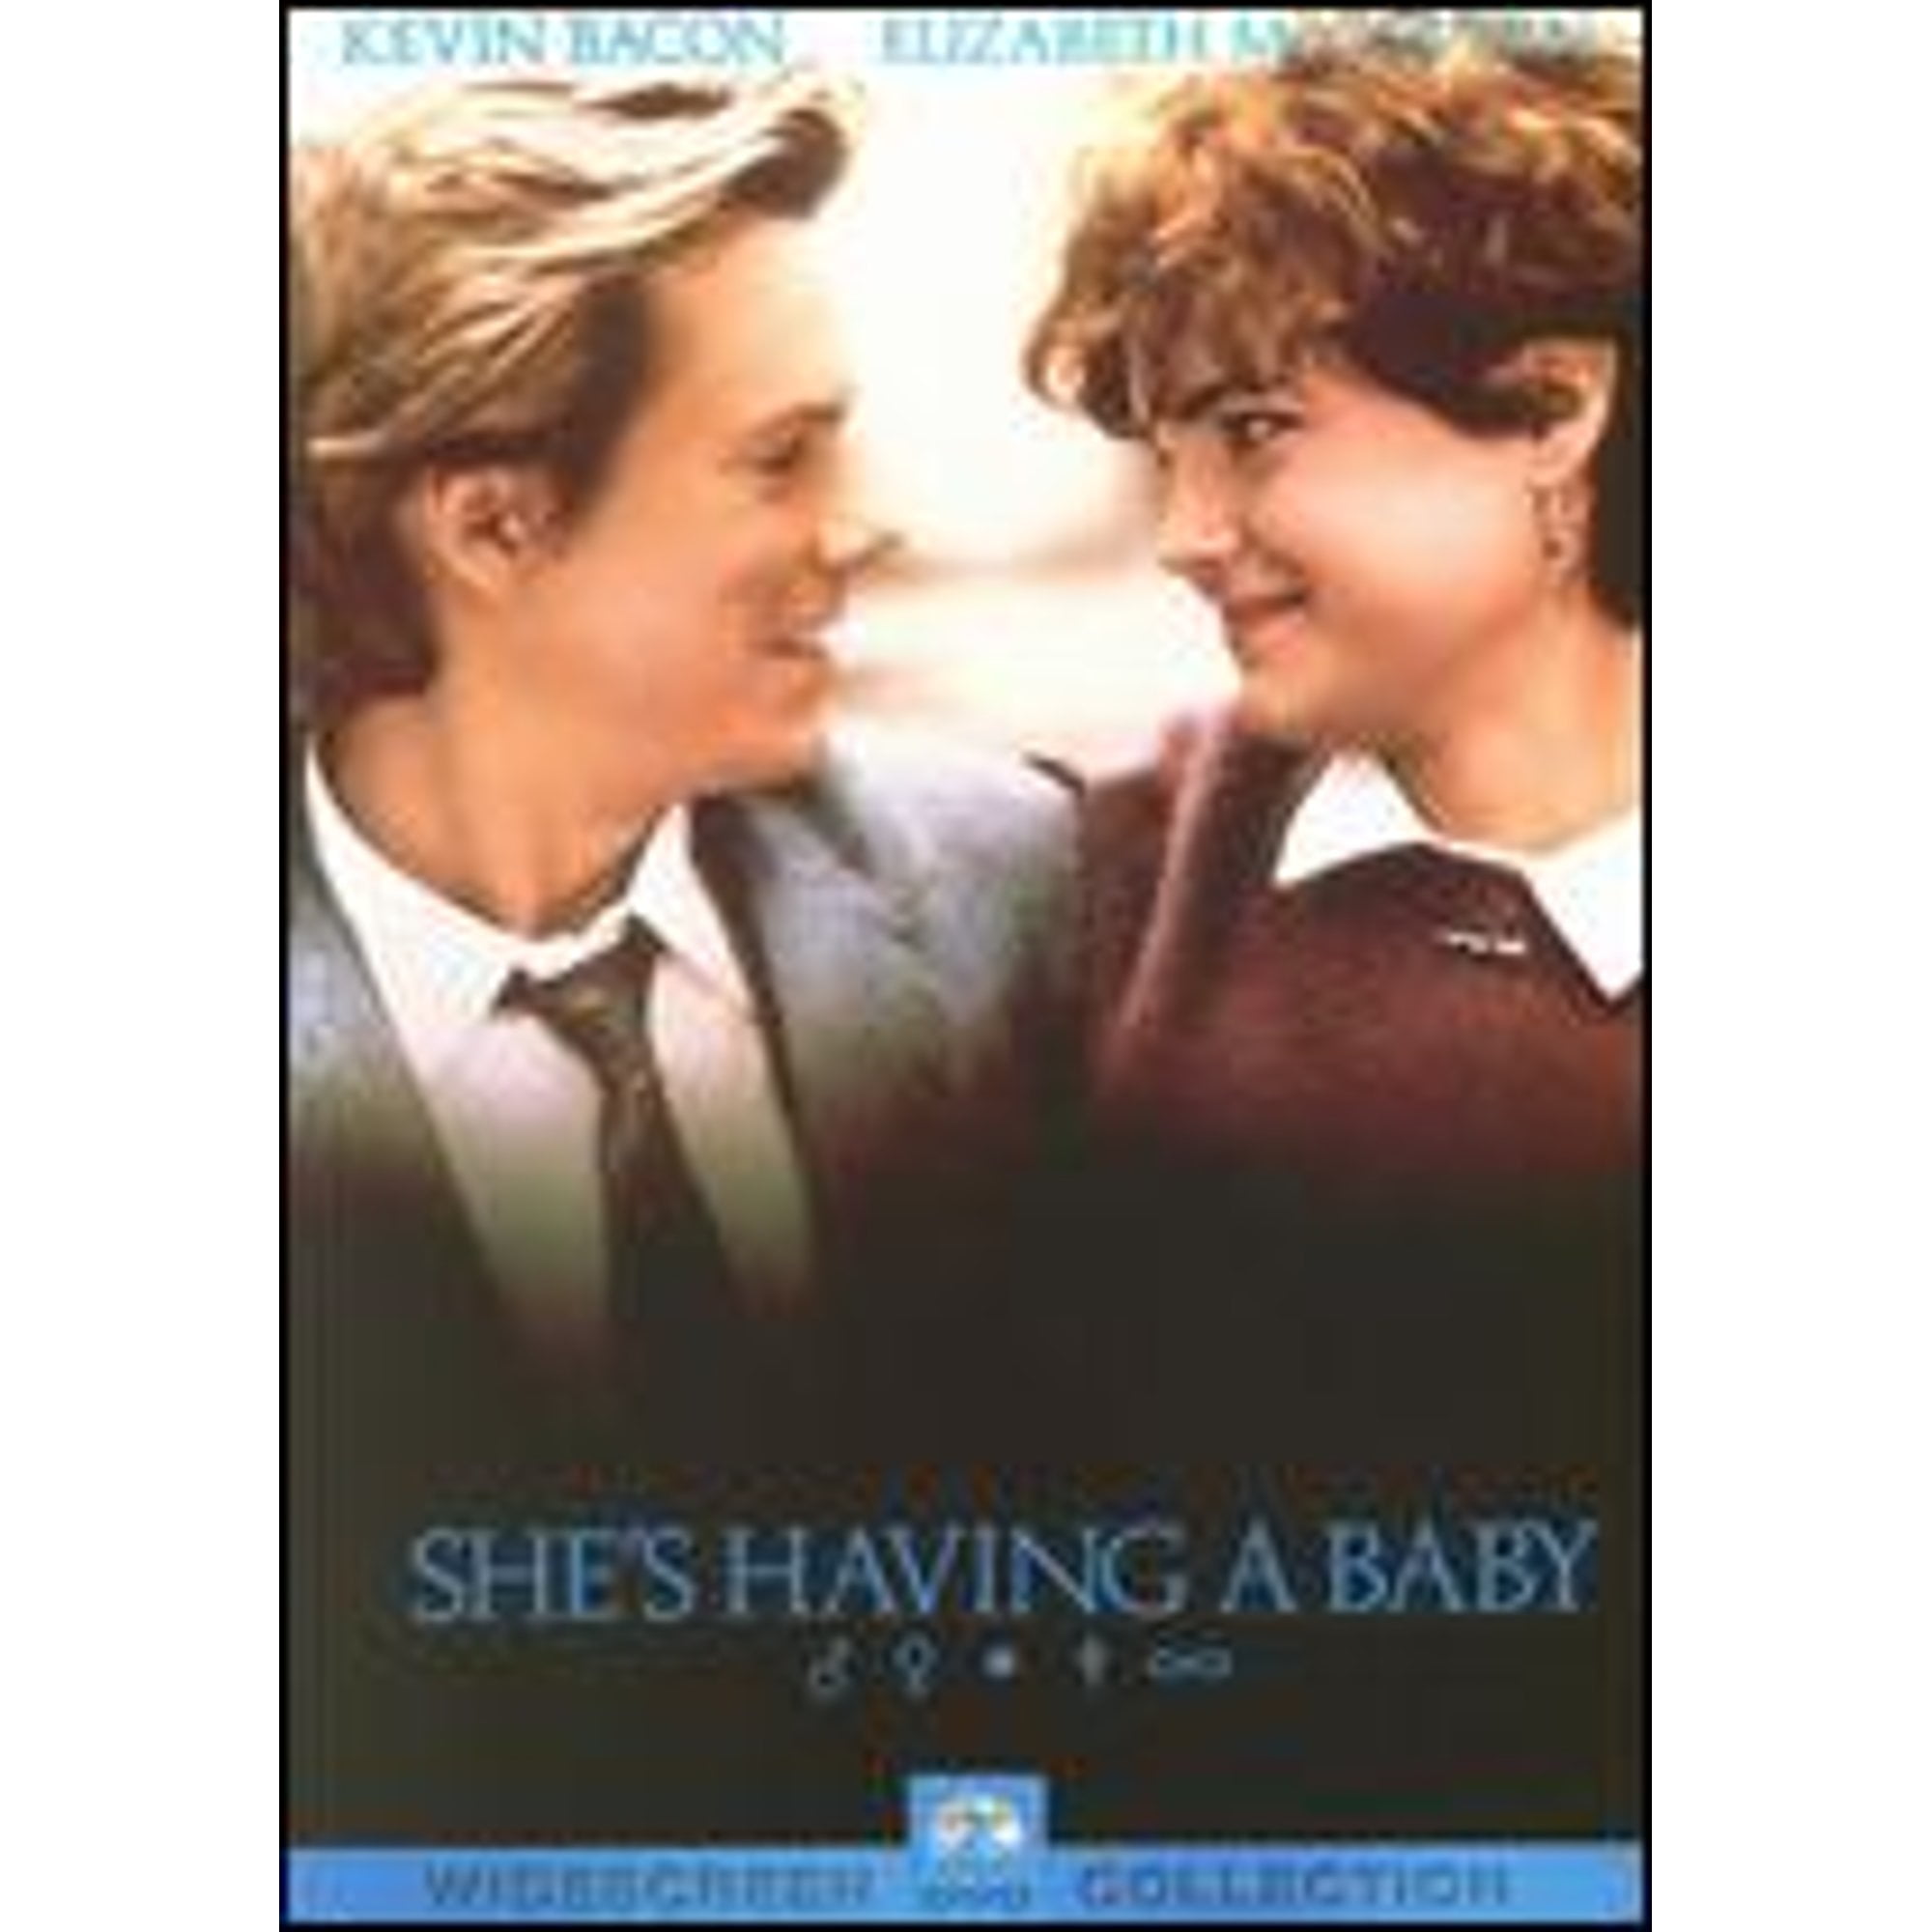 Pre-Owned She's Having a Baby (DVD 0097363202745) directed by John Hughes